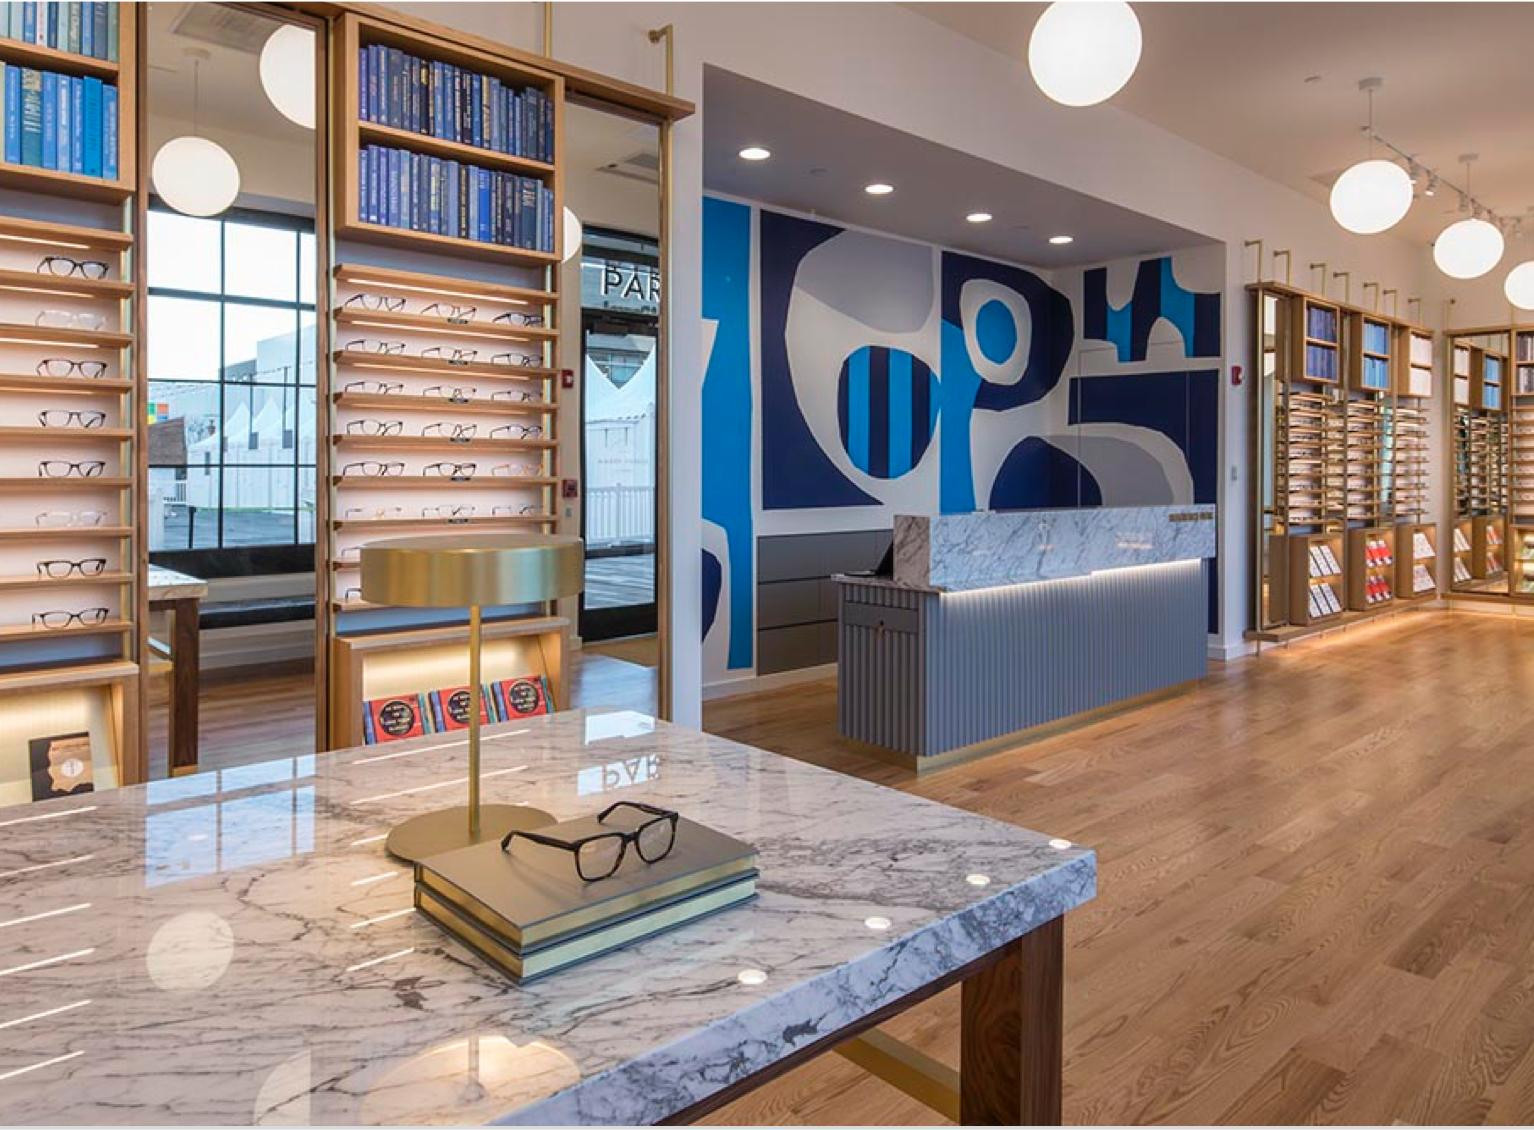 24 Spectacular Hardwood Floor Store Bolingbrook Il 2024 free download hardwood floor store bolingbrook il of pretty t mobile store bolingbrook special piratecoin within oakbrook center from t mobile store bolingbrook sourcewarbyparker com